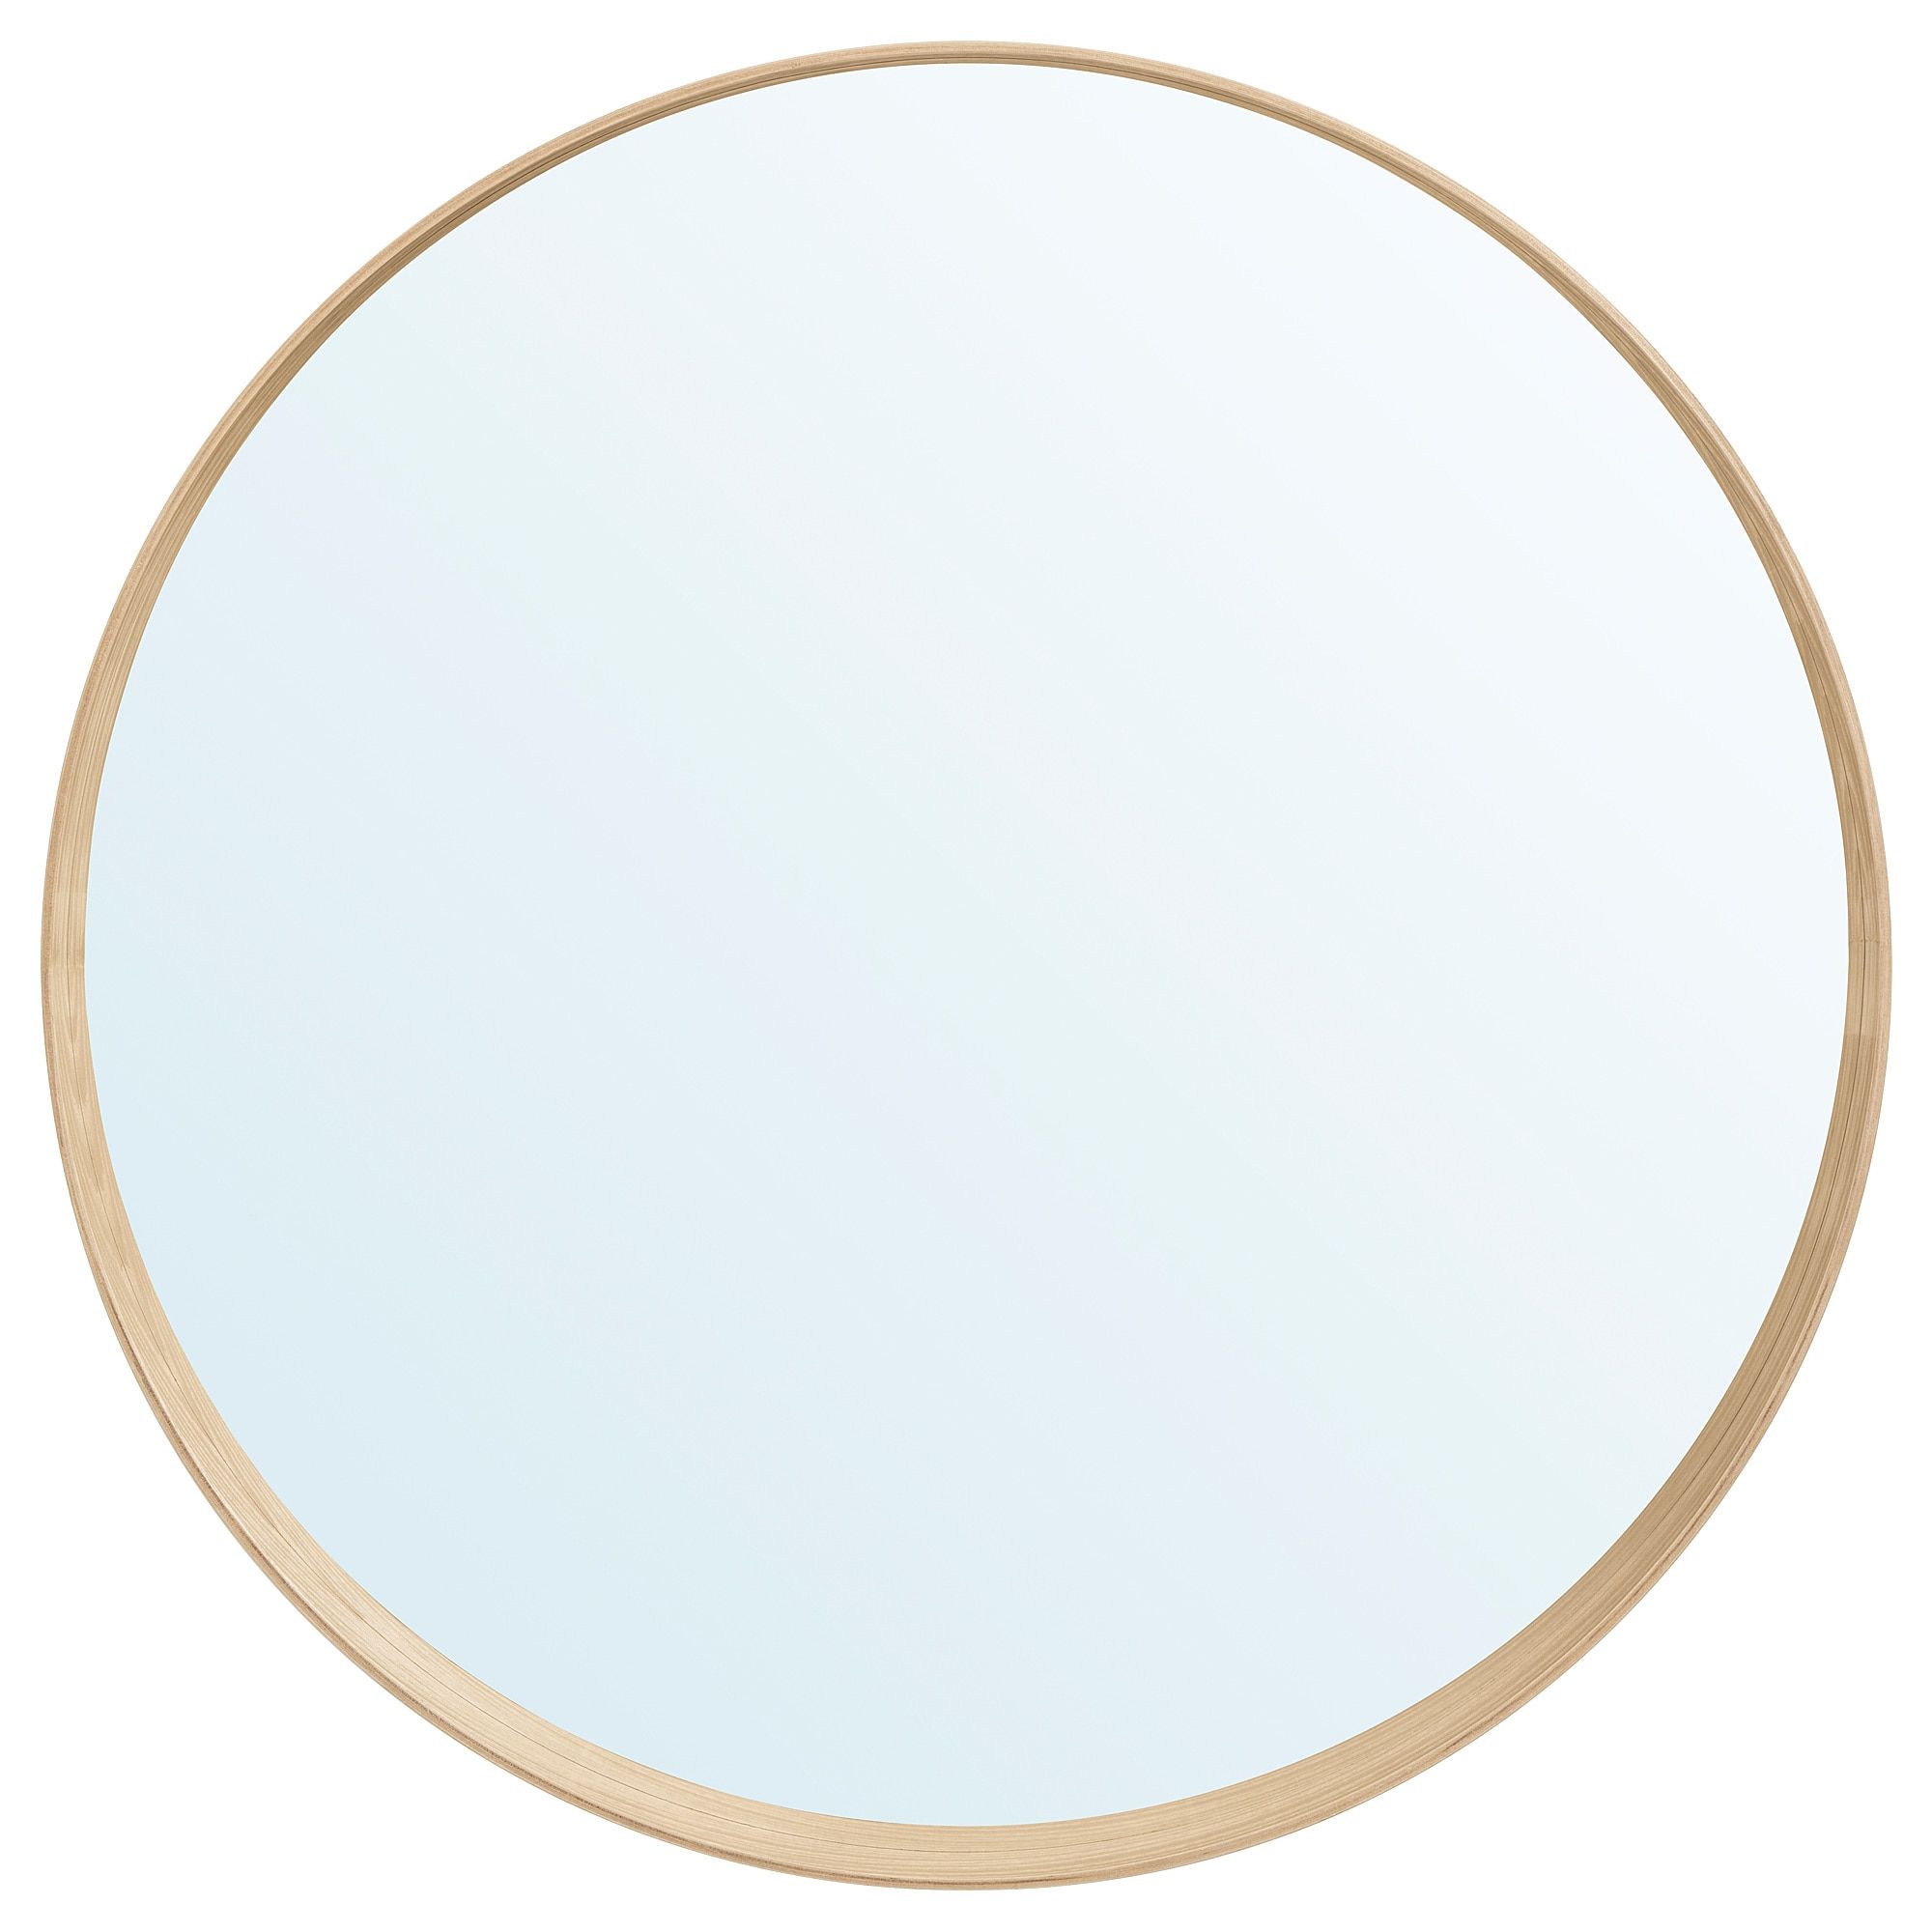 Ikea Oval Wall Mirrors Throughout Current Stockholm – Mirror, Walnut Veneer (View 16 of 20)